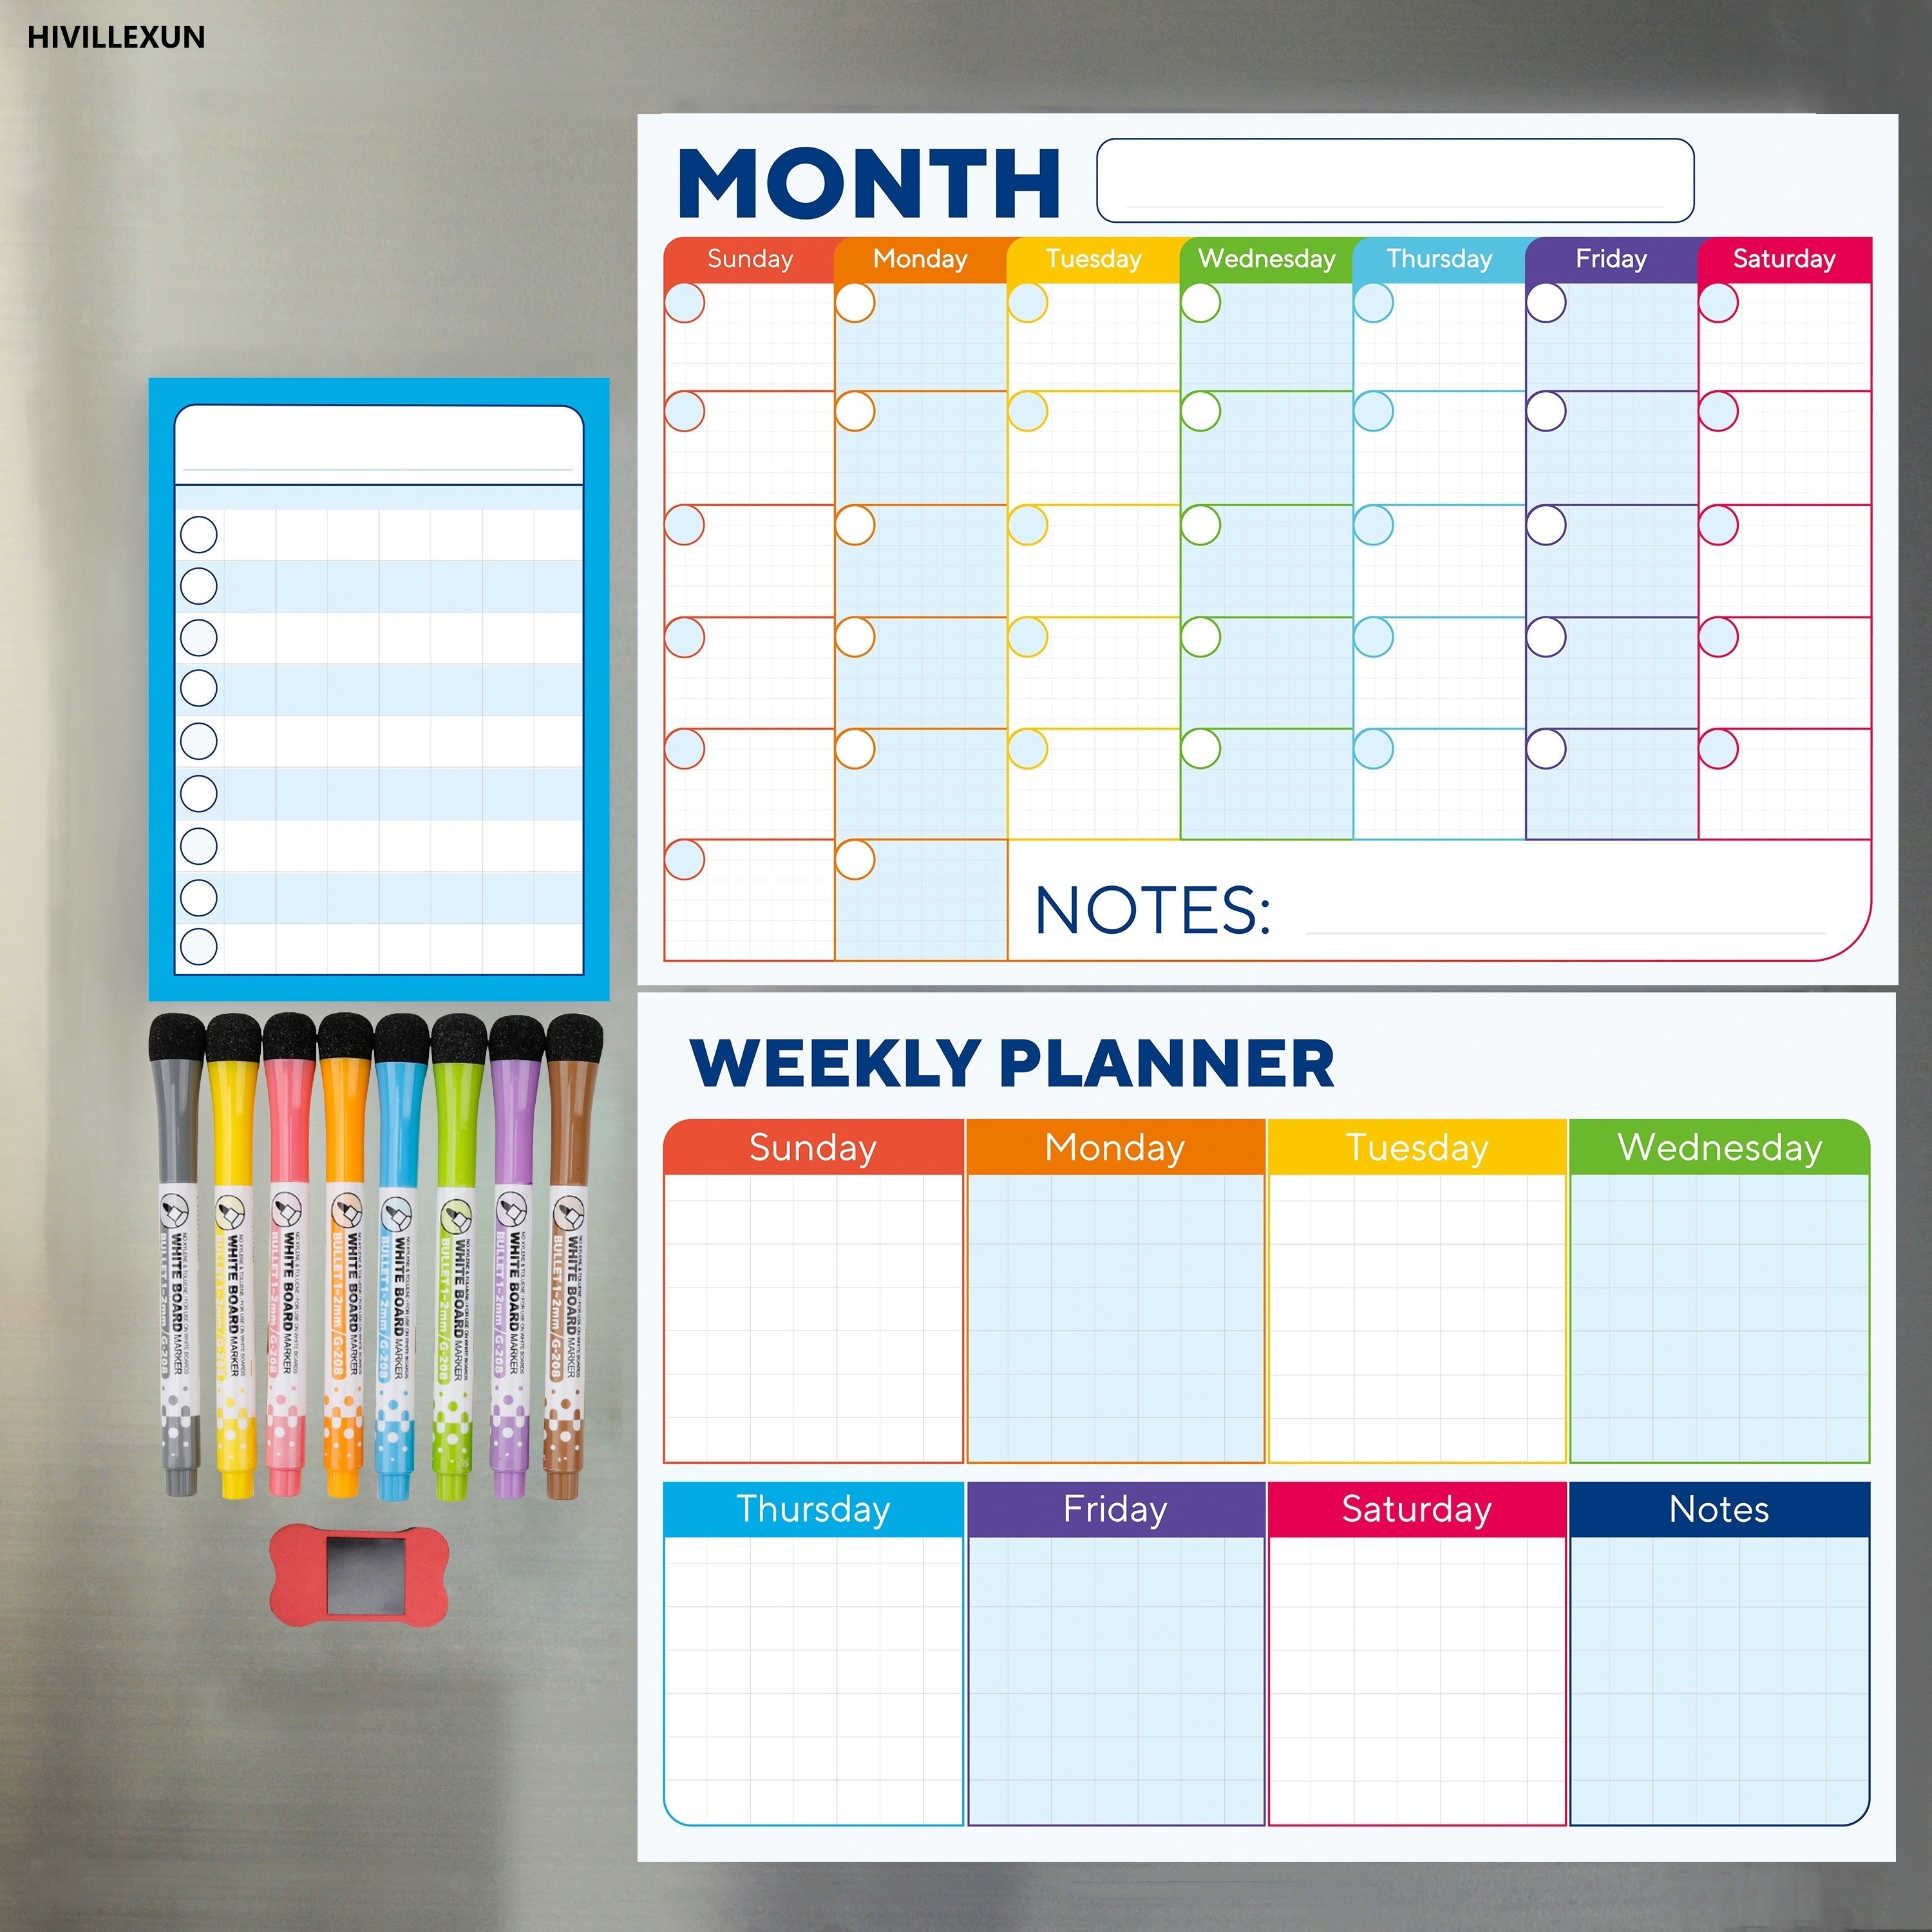 

3pcs Pack Magnetic Dry Erase Calendar Whiteboard Set For Refrigerator, Wall, And Fridge Organization With Monthly, Weekly, And Daily Notepads, Comes With 8 Markers And 1 Eraser